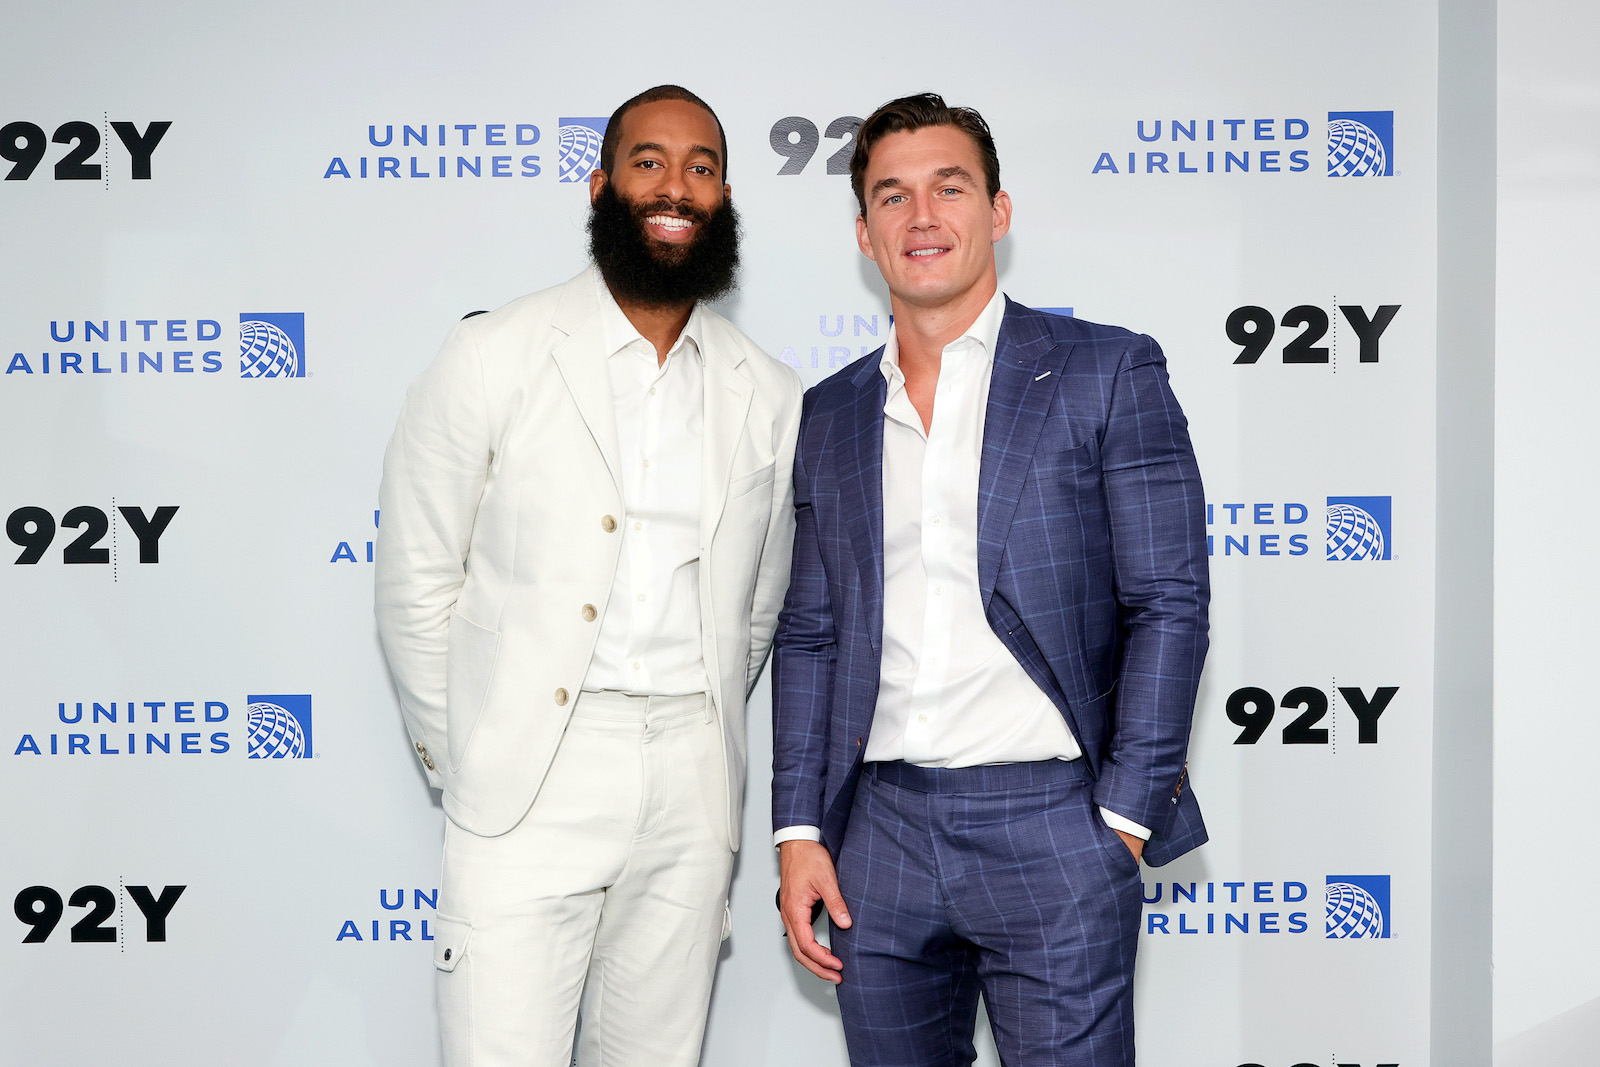 Matt James and Tyler Cameron from 'The Bachelor' smile on the step and repeat at a recent event 